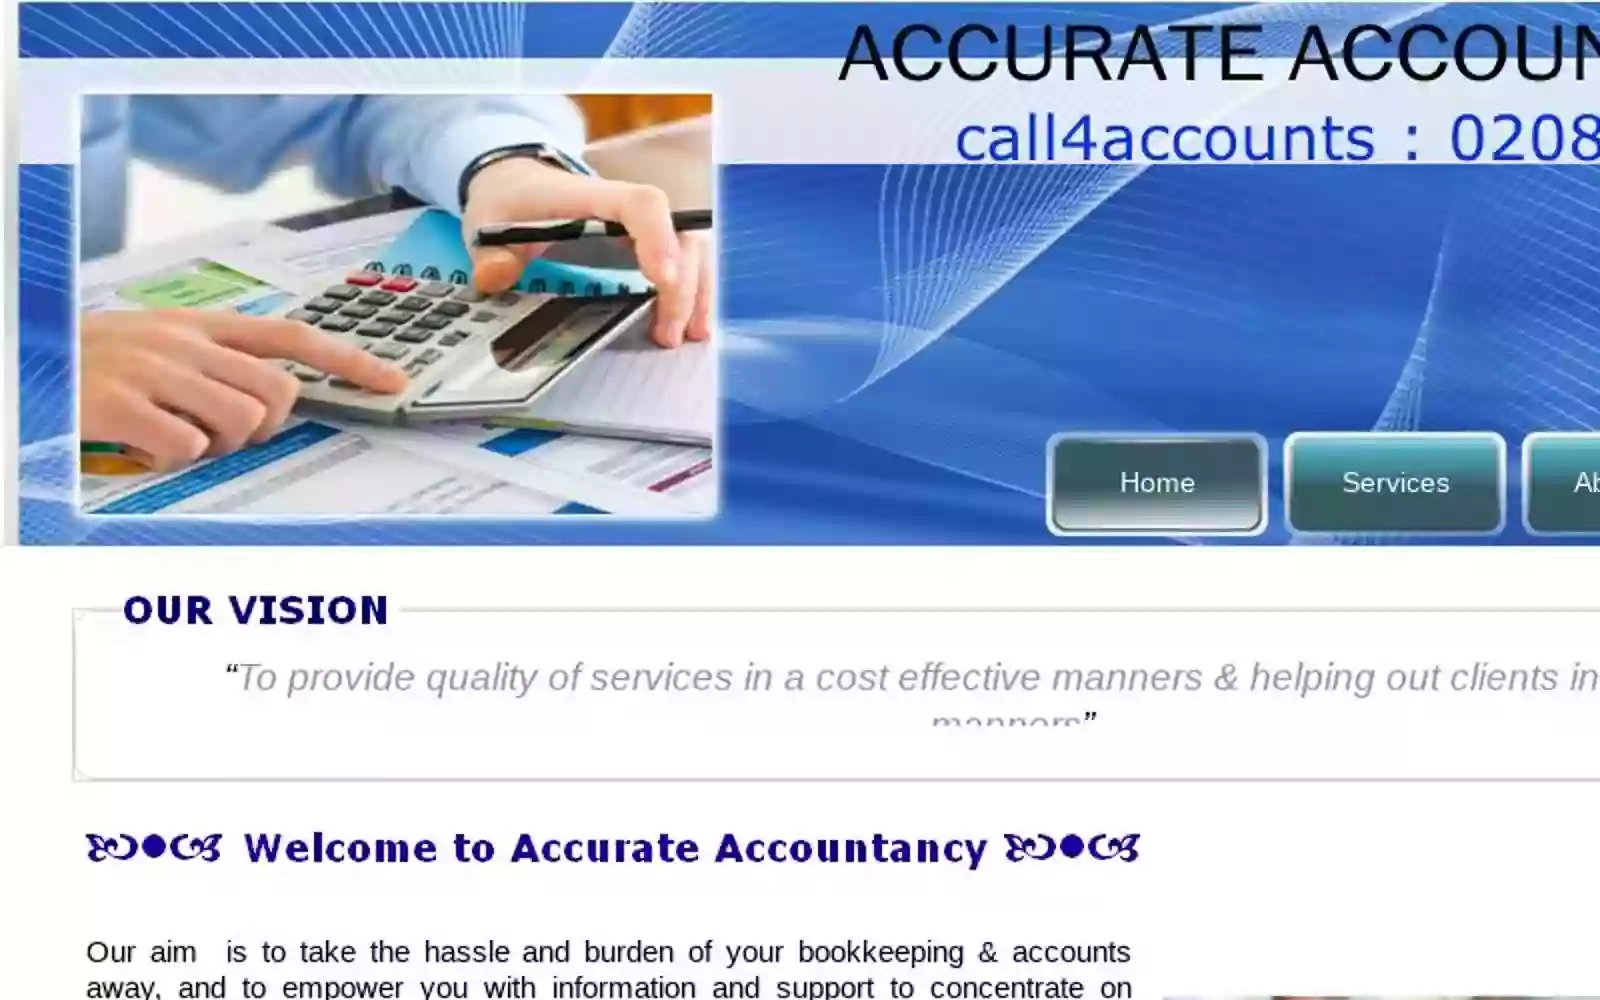 Accurate Accountancy - call4accounts